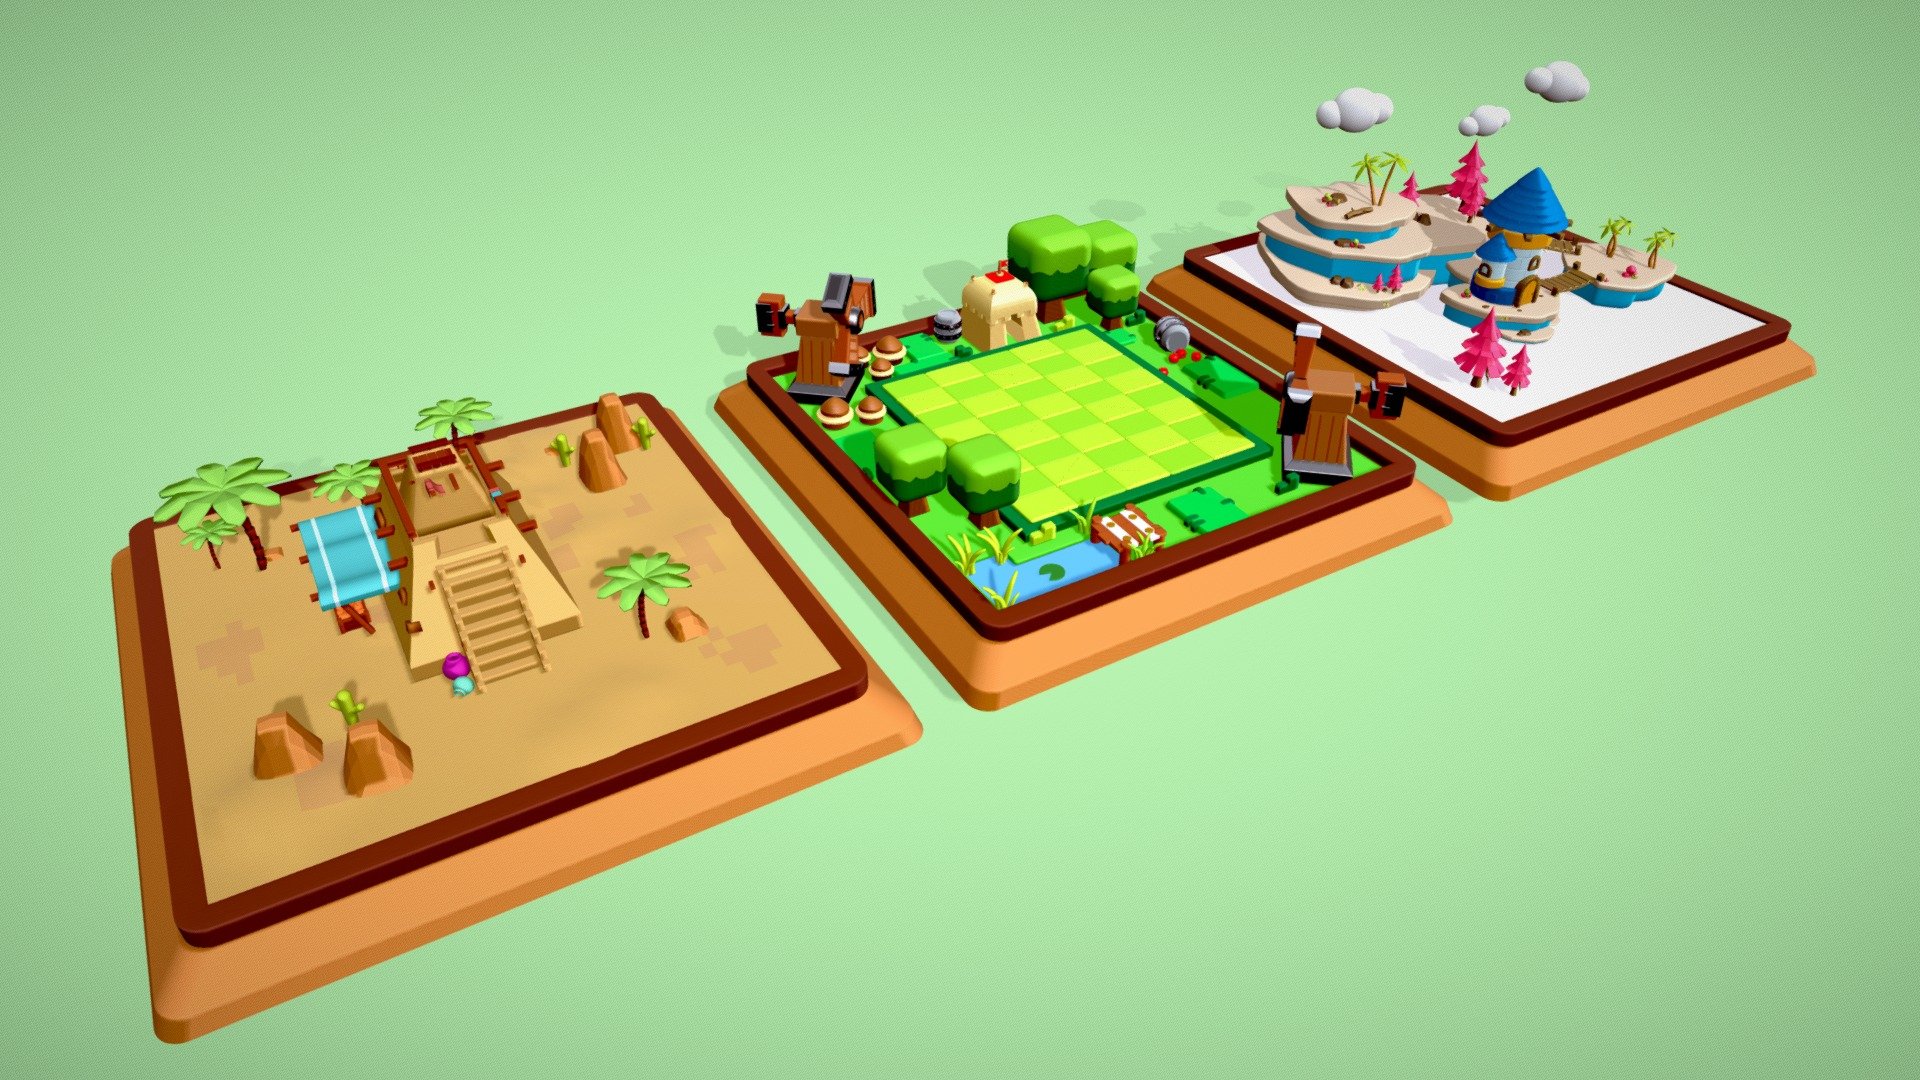 This package contains Very nice three low poly environments in one pack.
1) Pyramid in Desert Environment
2) Green Farm Field Environment
3) Snow Environment

This pack is suitable for Hyper-Casual games, Platform Games, rendering, or whatever you want.
Can be used for the playground or platform games like Chess, Ludo, Merge Games, etc.
You can create various color variants as per your needs by changing materials.
You can also separate any part of the model like a tree, house, rock, etc.

All the models are originally modeled in a blender. This pack included the following file formats: Fbx, Obj, Glb, and Blend.
Leave valuable comments below. 
Rate this product if you liked it. Thank you 3d model